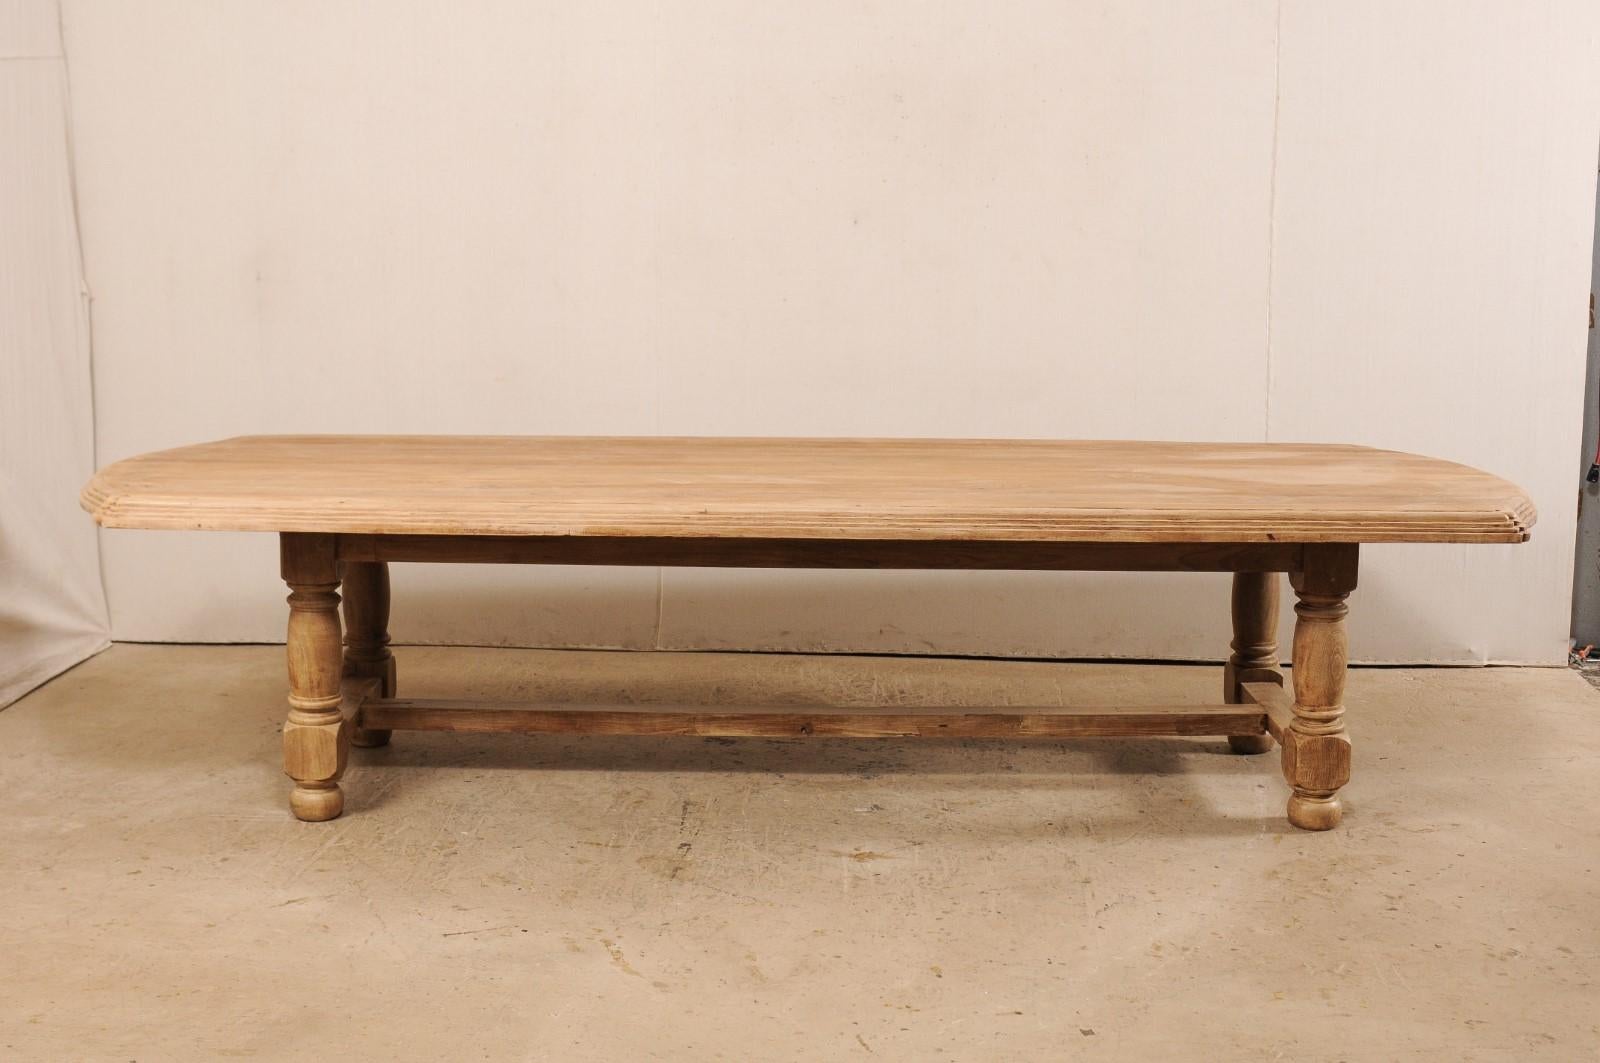 light wood dining table